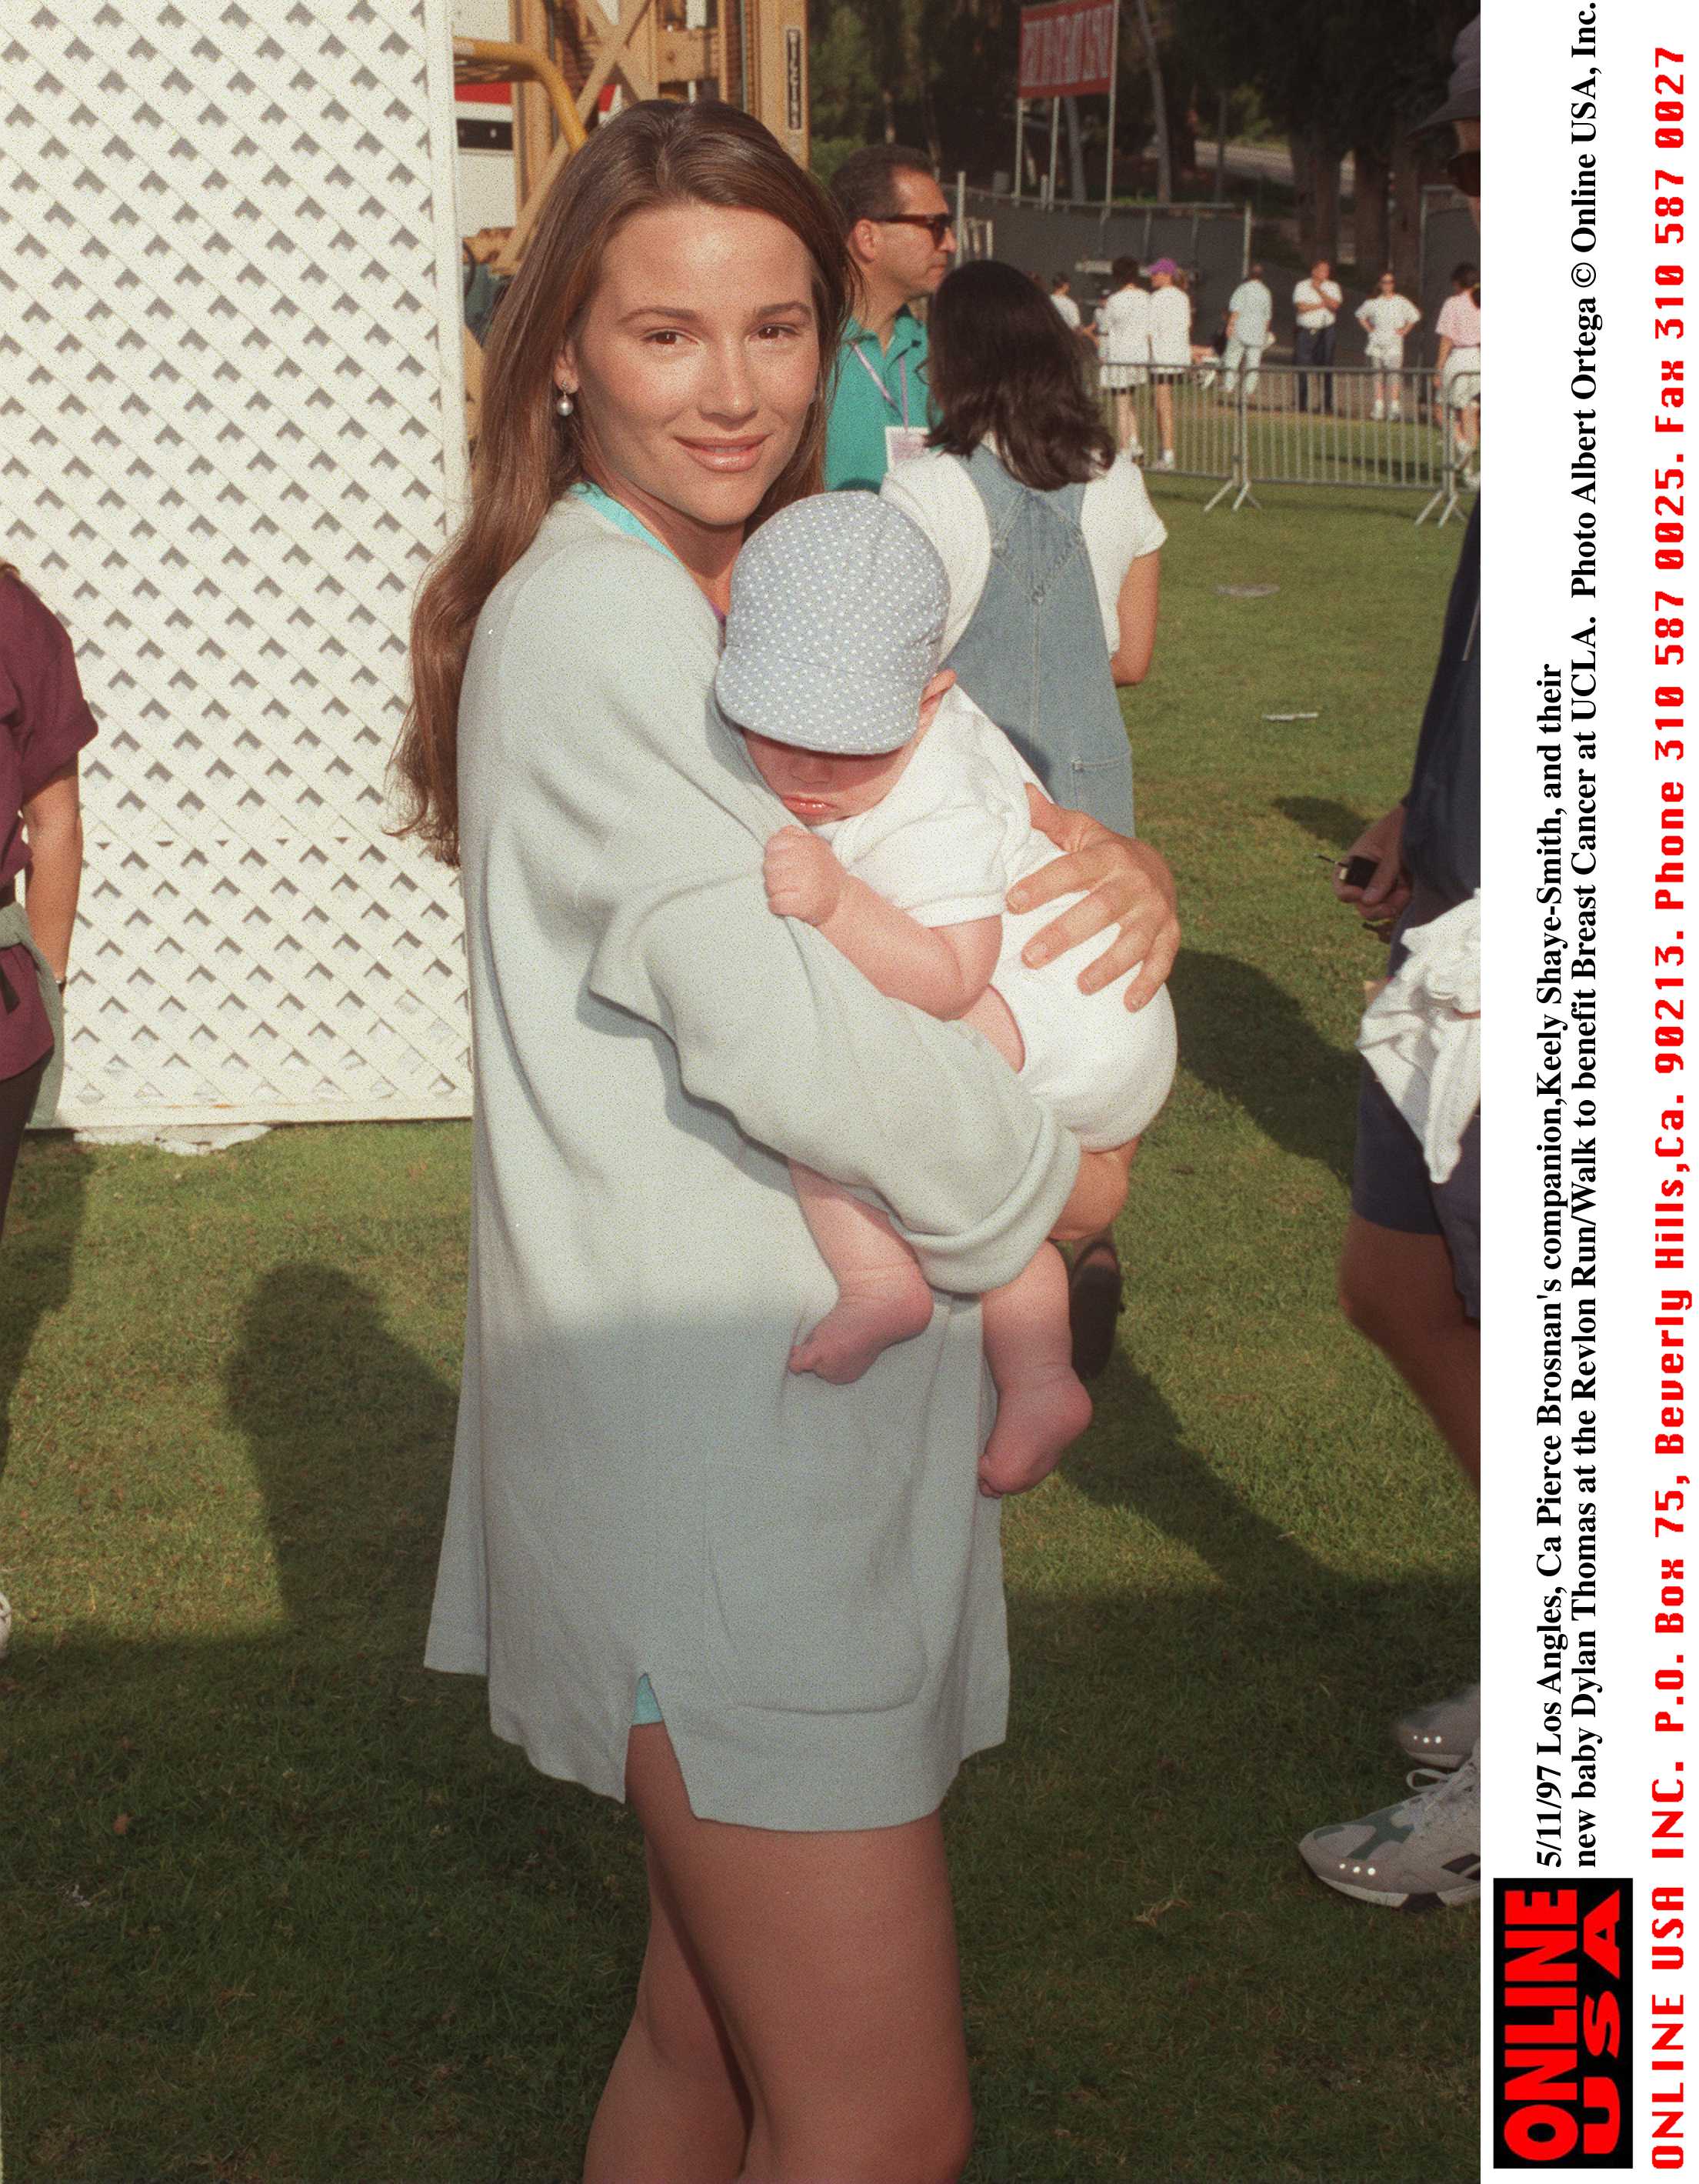 The lady and her son at the Revlon Run/Walk to benefit breast cancer at UCLA on March 12, 1997 | Source: Getty Images